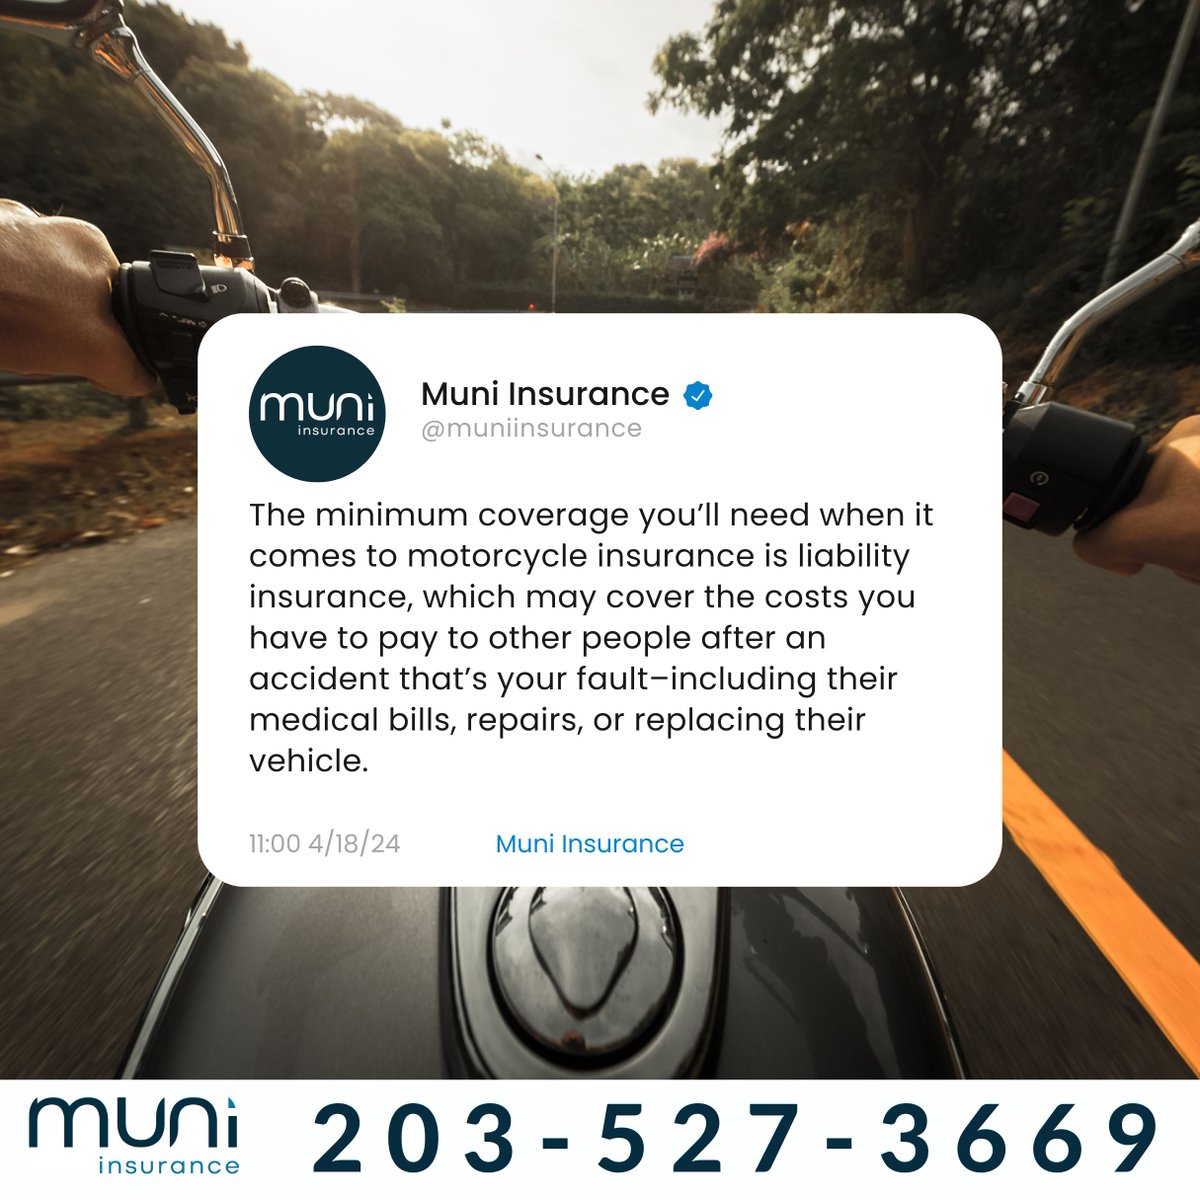 Did you know your local laws will set a minimum amount of coverage for liability insurance? You may want the peace of mind of getting a higher coverage limit! Click the link below for a complimentary quote! 
➡️ bit.ly/4aGvXp4 
#muniinsurance #motorcycleinsurance